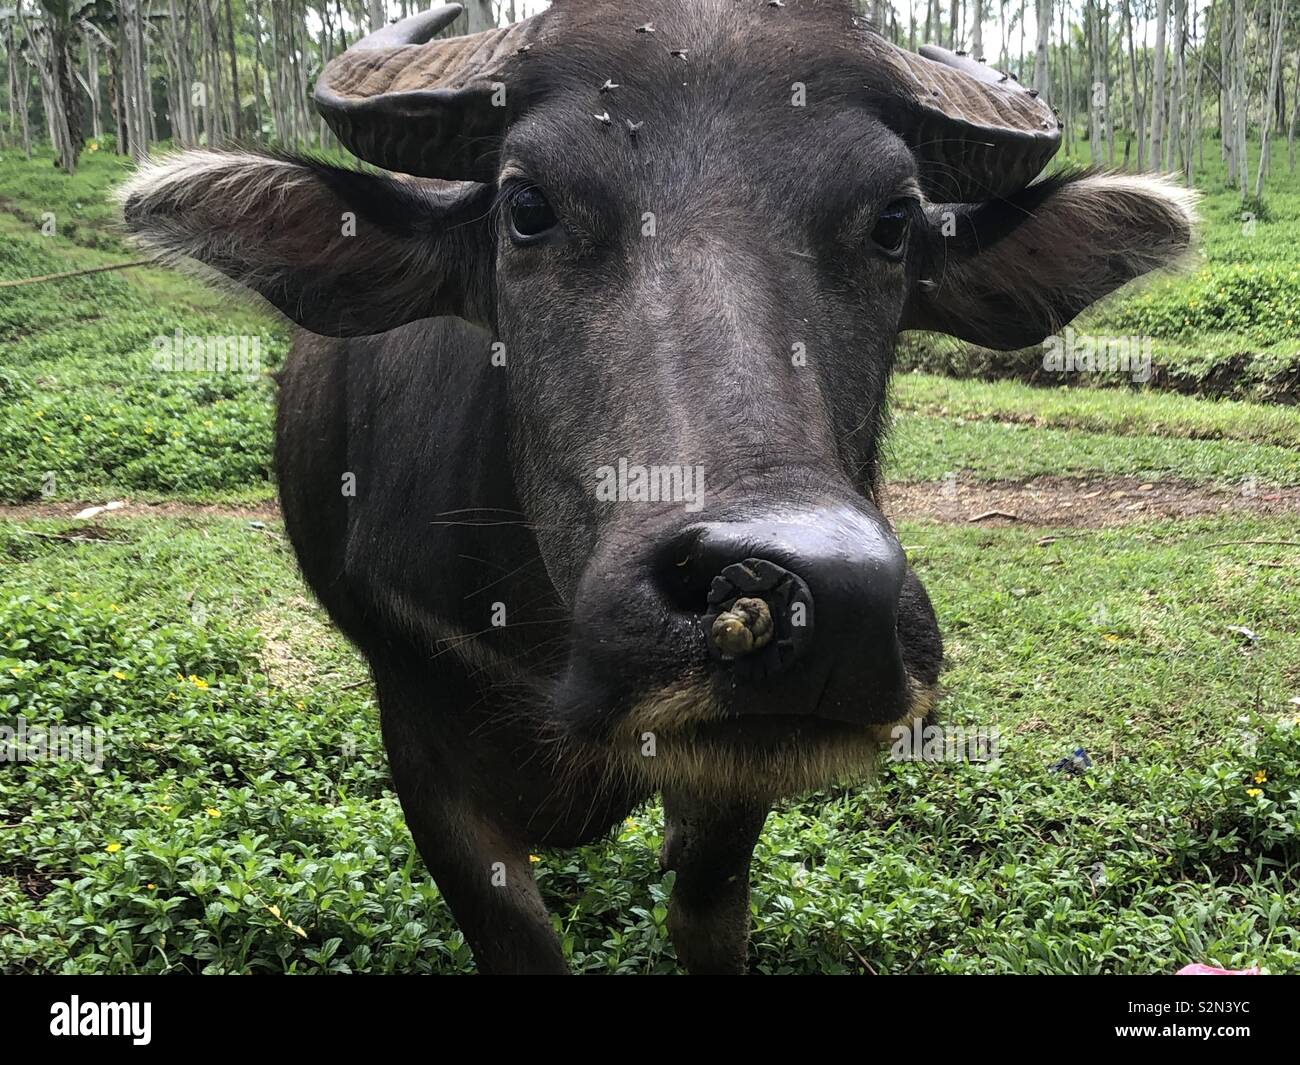 A Philippine buffalo popularly known as carabao. Stock Photo